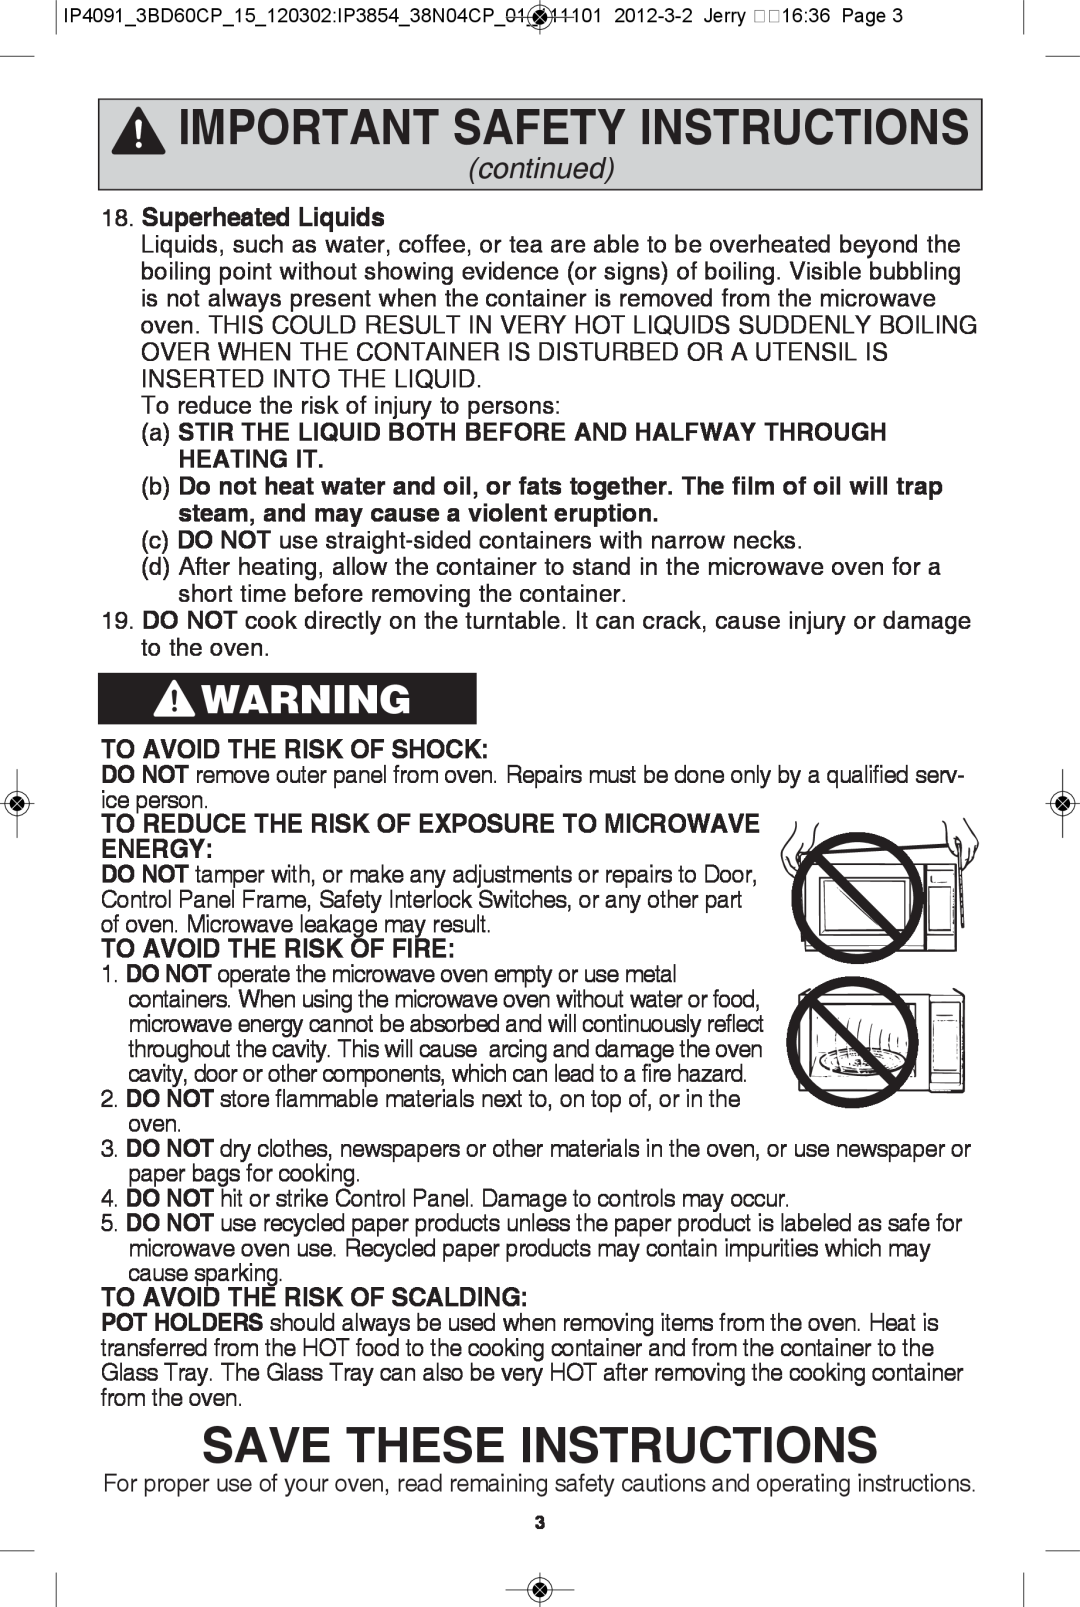 Panasonic NN-SE992S, NN-SE792S manual save these instructions, continued, superheated liquids, to avoid the risK of shocK 